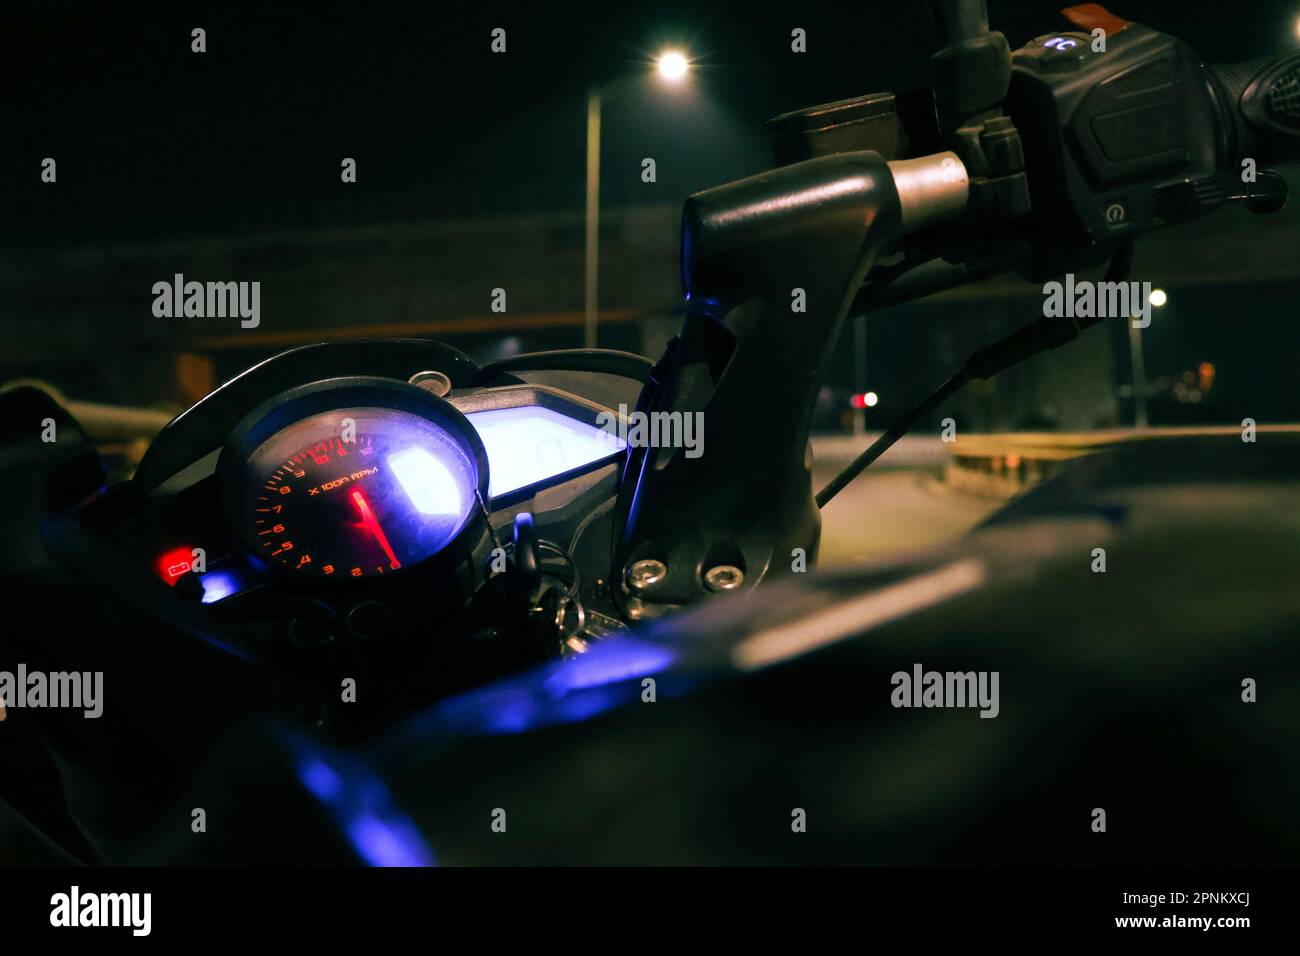 An image of a motorcycle dashboard featuring illuminated instrumentation and controls Stock Photo